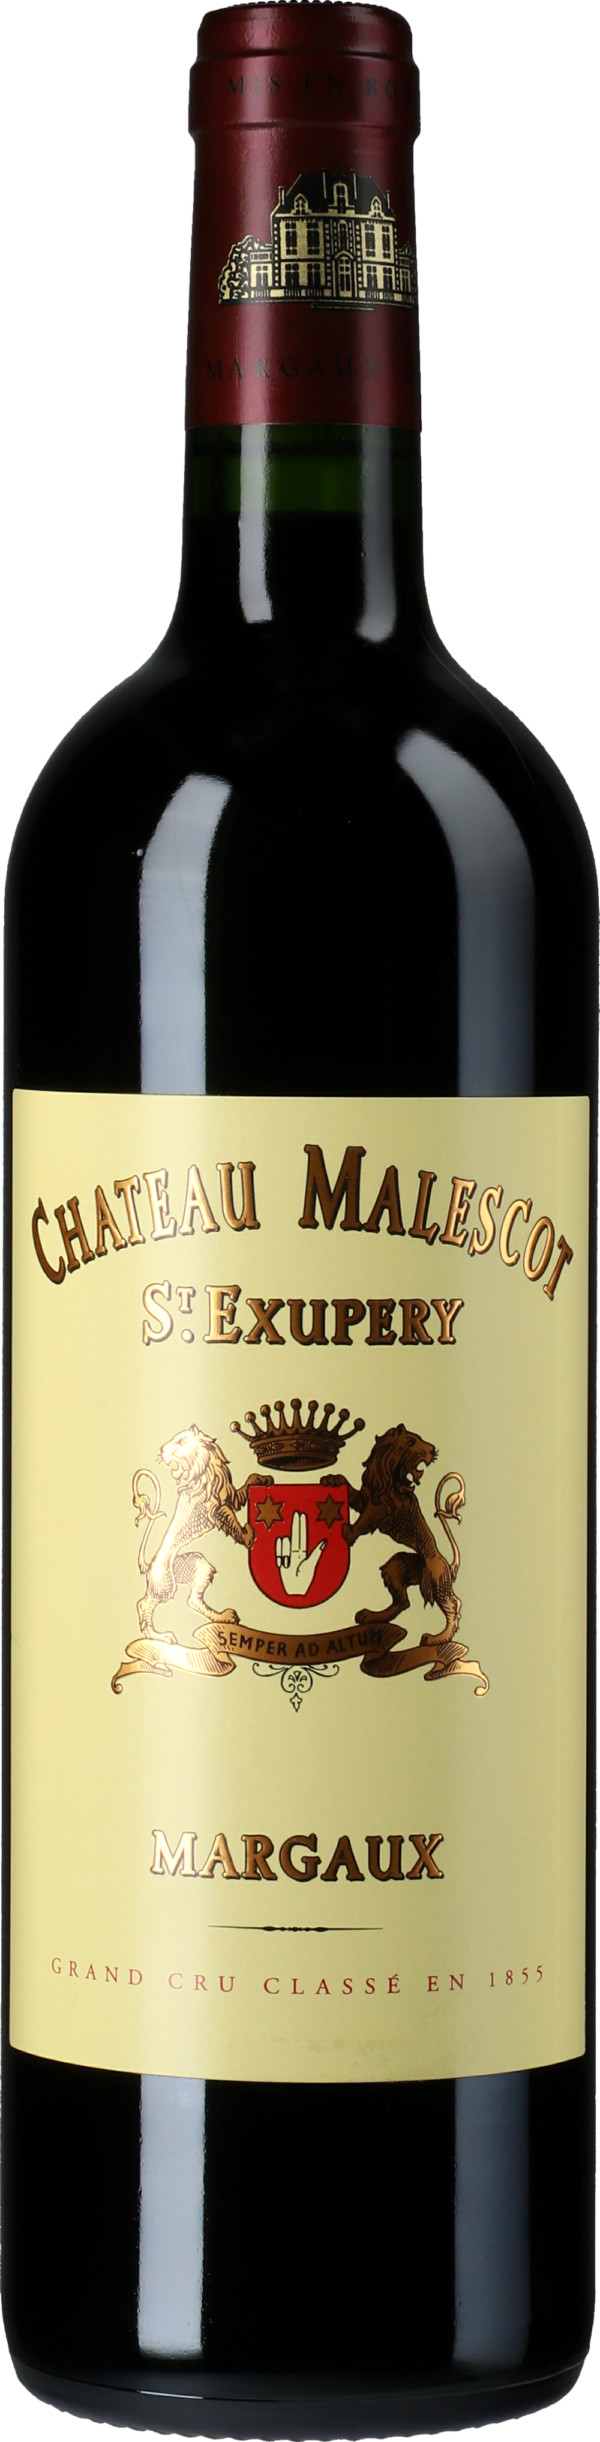 Product image of Chateau Malescot Saint Exupery 2018 from 8wines